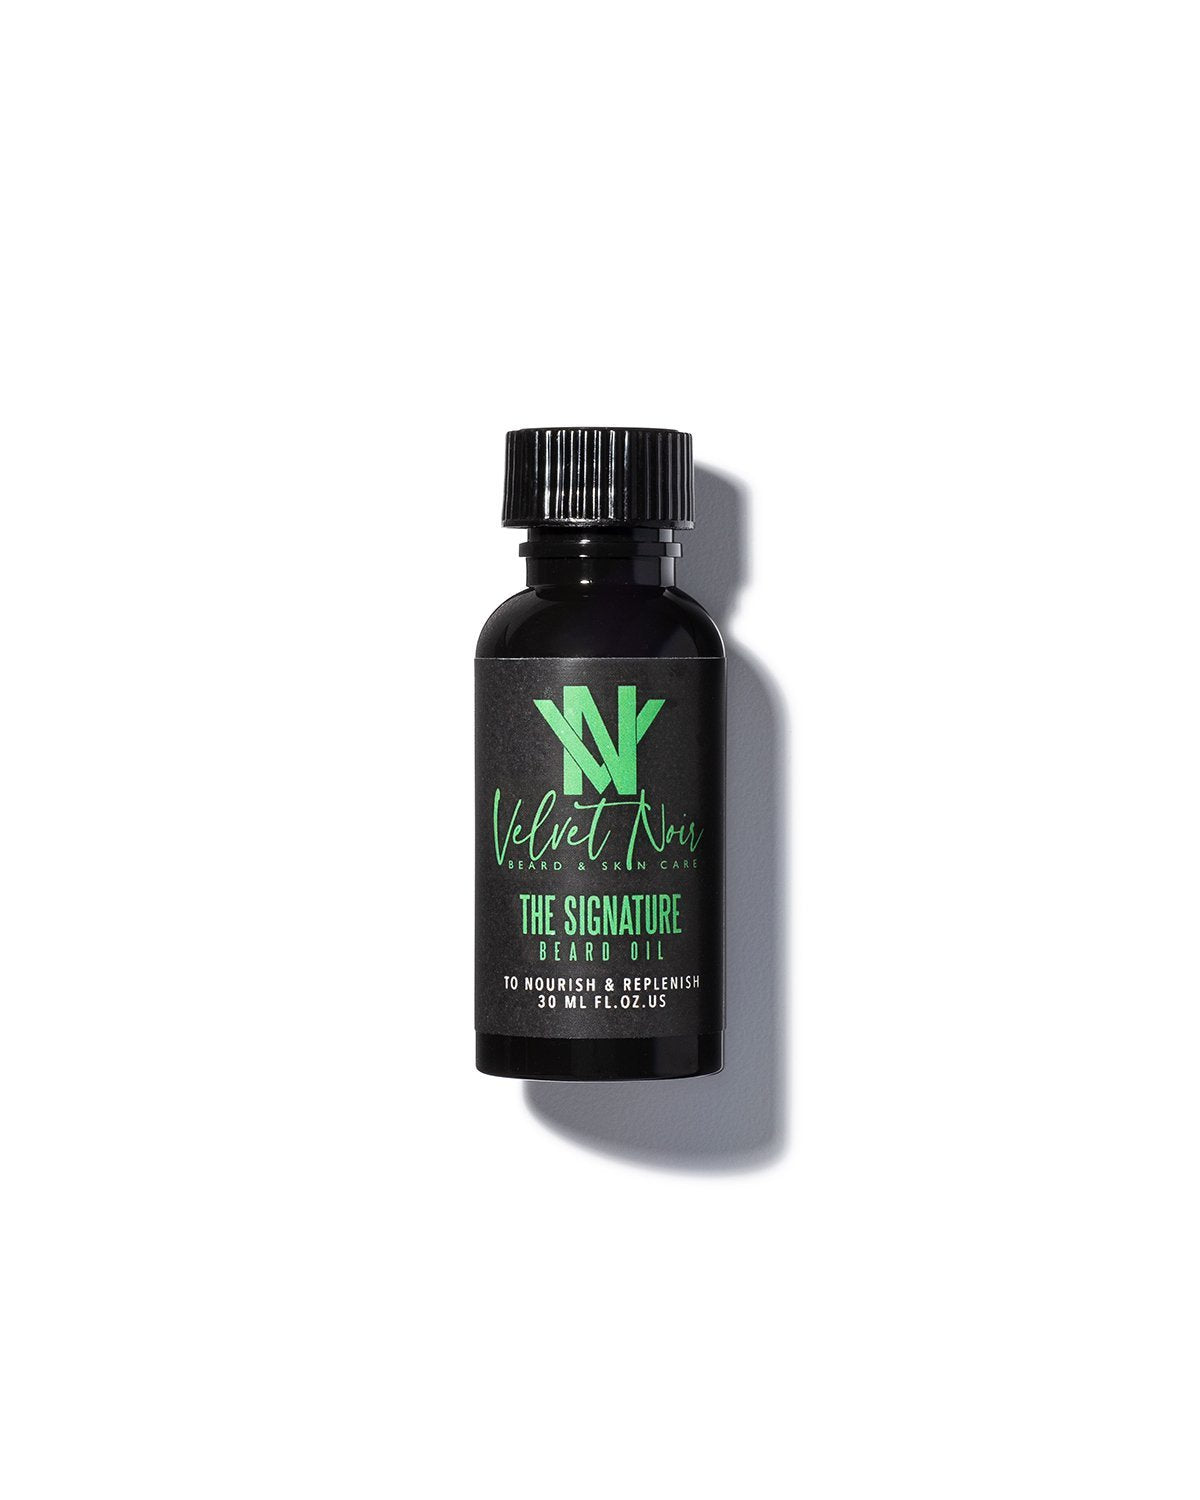 Velvet Noir Signature Beard Oil Beauty Supply store, all natural products for men. The wh shop is the sephora for black owned brands